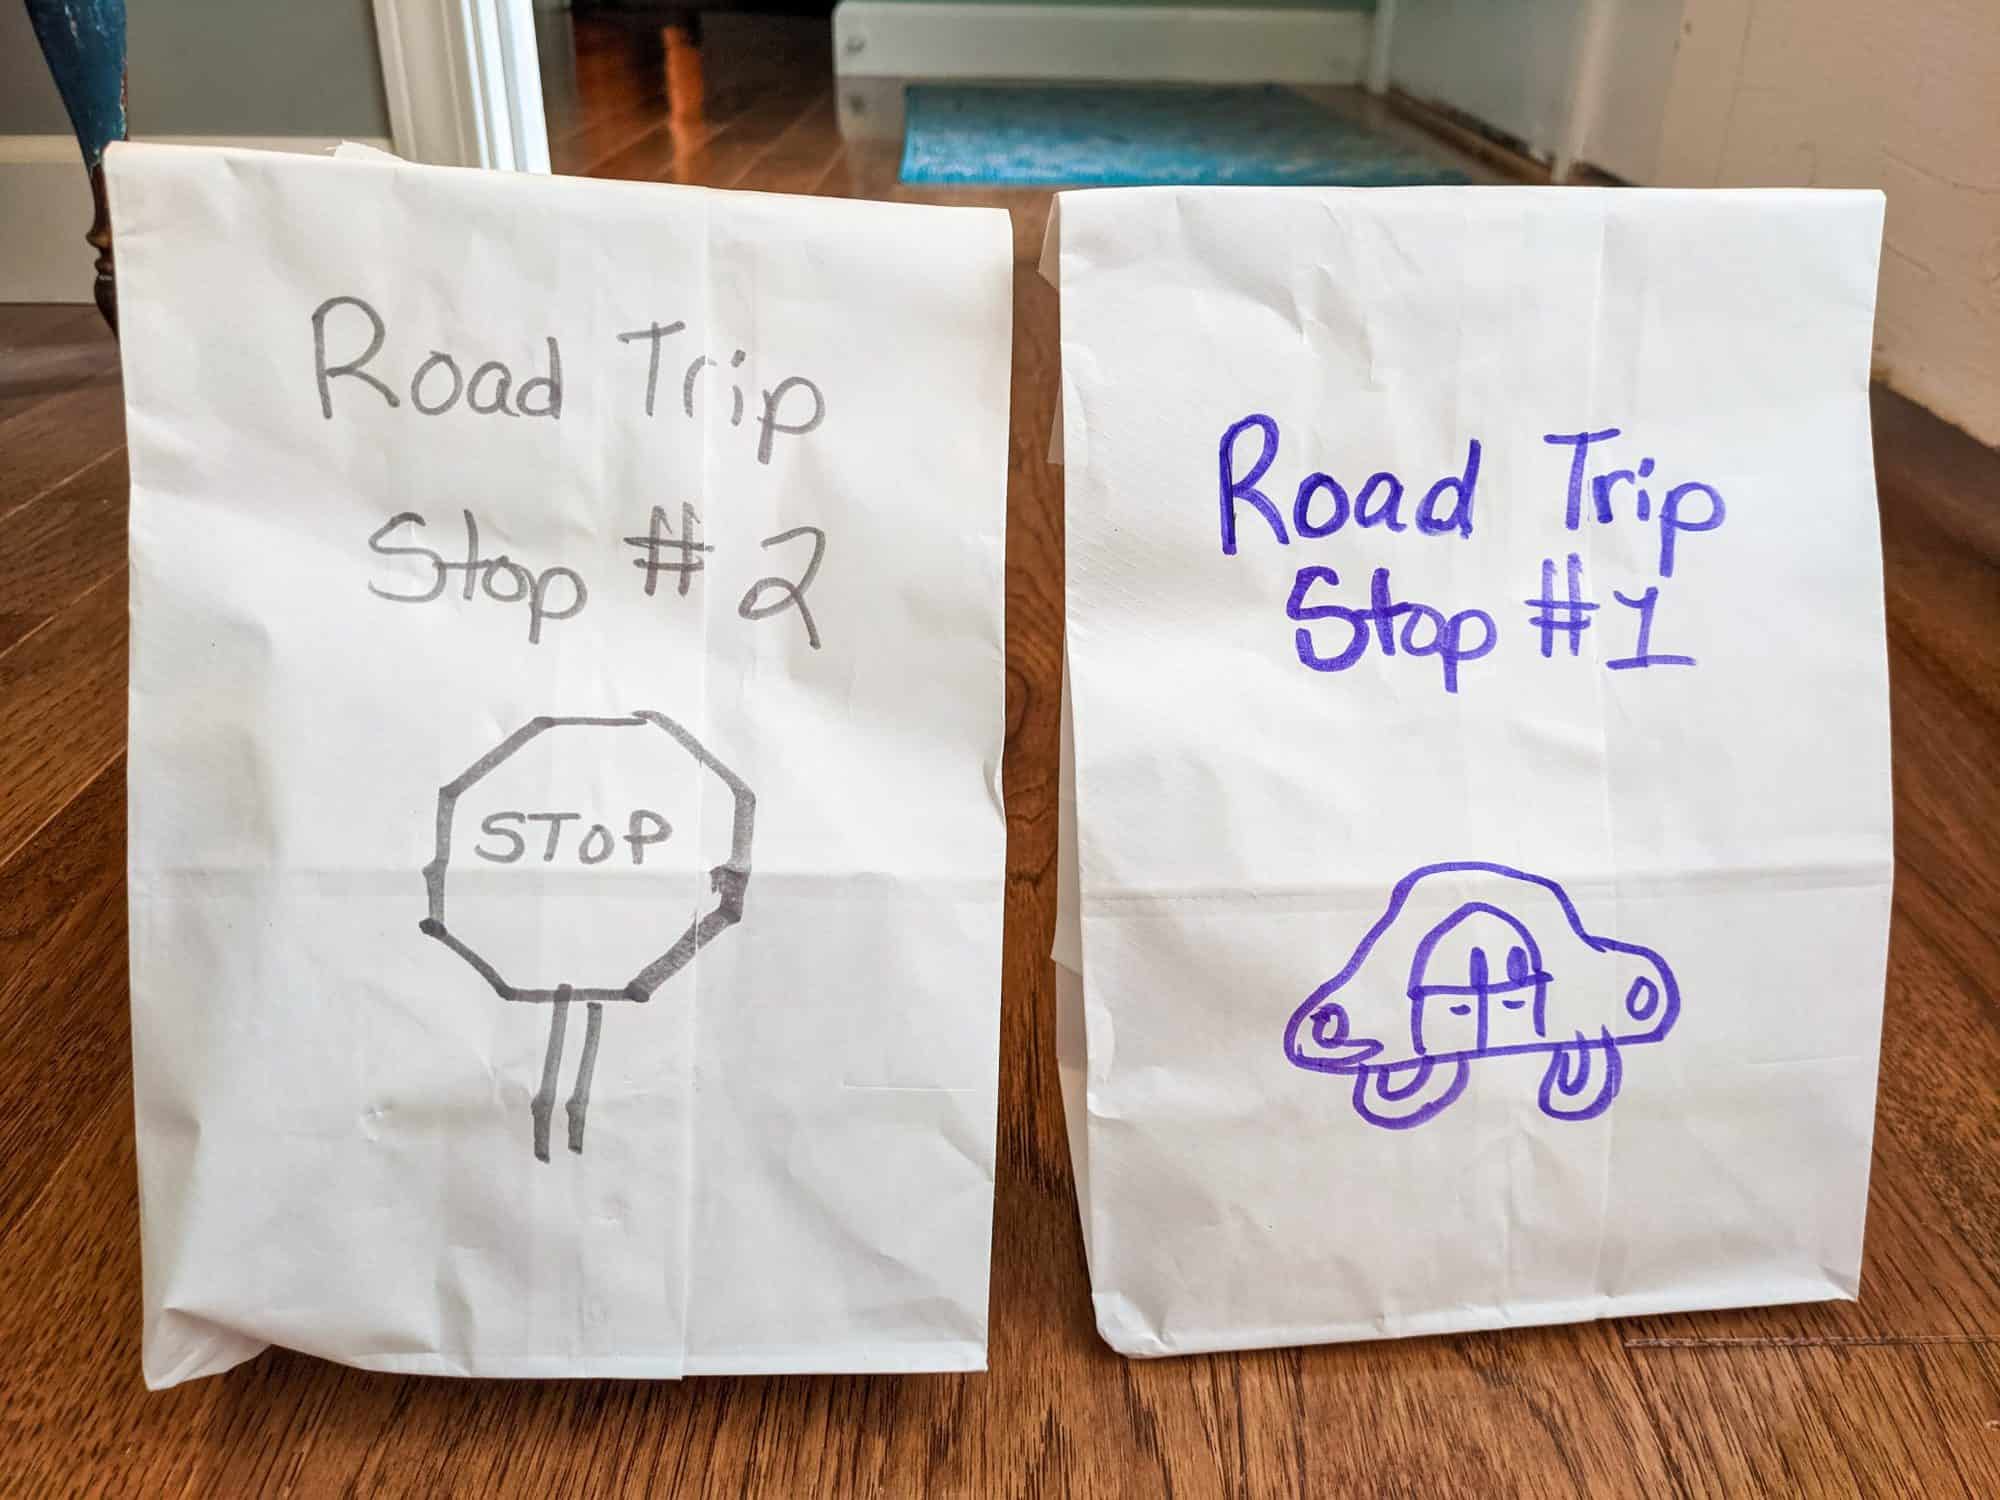 Screen free road trip ideas with kids - surprise bags, goody bags